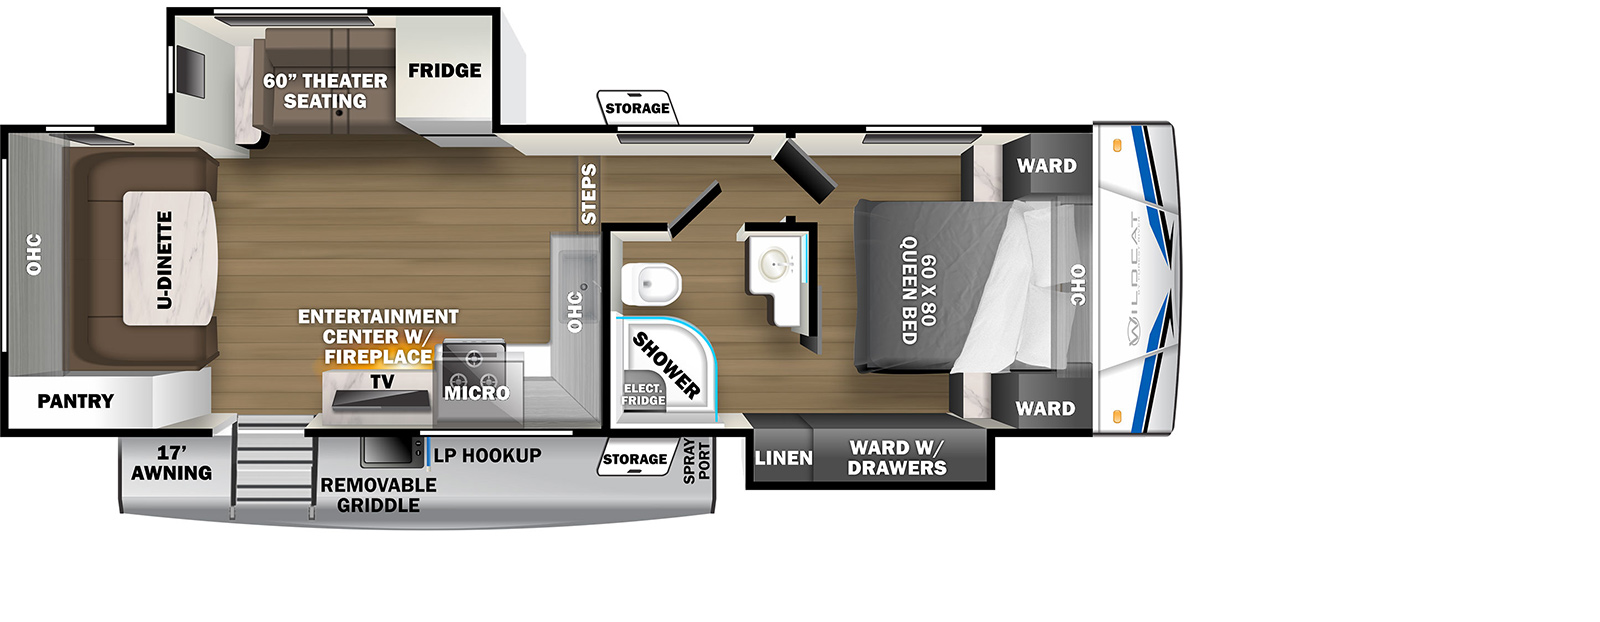 The Wildcat 260RD floorplan exterior sports a 16 foot electric power awning. Located toward the rear of the RV, the entry door leads directly to a living area. In the living area on the off-door slide out, is a 60” theater sofa to the left, a refrigerator in the center and a pantry to the right. Steps on the off-door side of the living room lead to a hallway with the bathroom to the right and the bedroom straight ahead. In the front of the living area on the doorside, is an L-shaped Counter top with a stove and sink. A microwave is above the stove area. Overhead cabinets are above the remaining countertop area. On the doorside, directly to the right of the entry door is a TV that sits on top of a set of drawers. The rear of the living area features an 80” U-Dinette with end tables on either side and overhead cabinets above. The front of the RV features a bathroom with a shower, toilet, sink, linen storage and sliding door to the bedroom. The bedroom houses a front queen bed with nightstands and wardrobes on either side. 